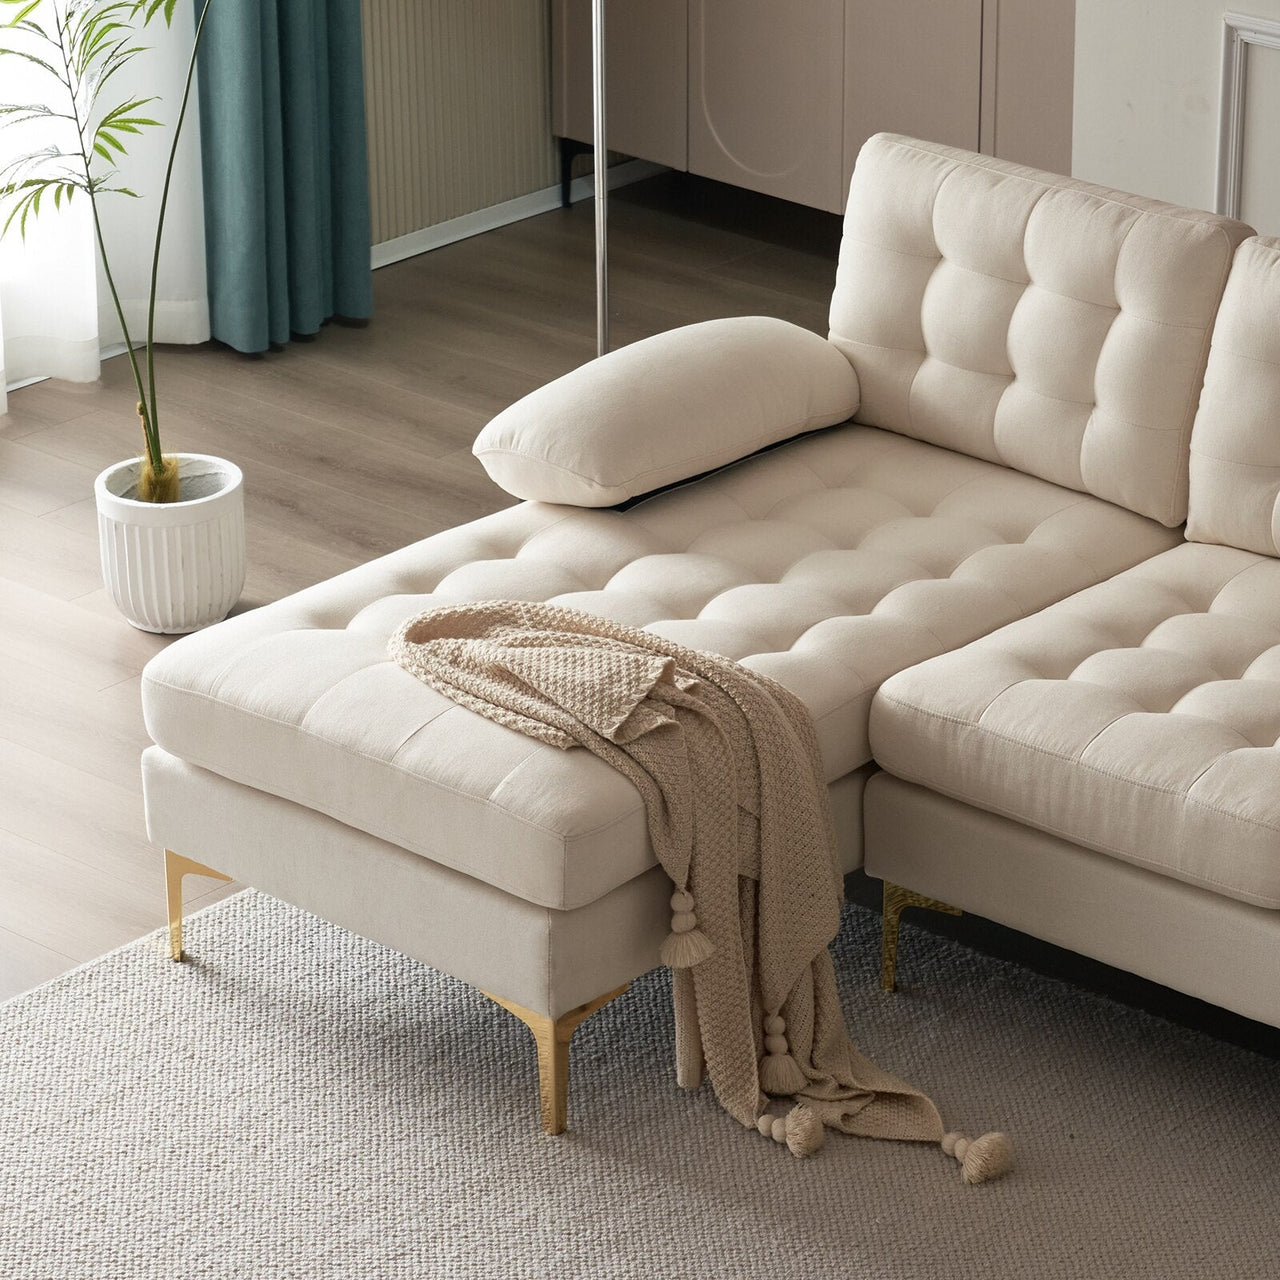 Beige Indoor Sectional Sofa with U - shaped Armrest and Golden Feet - Casatrail.com